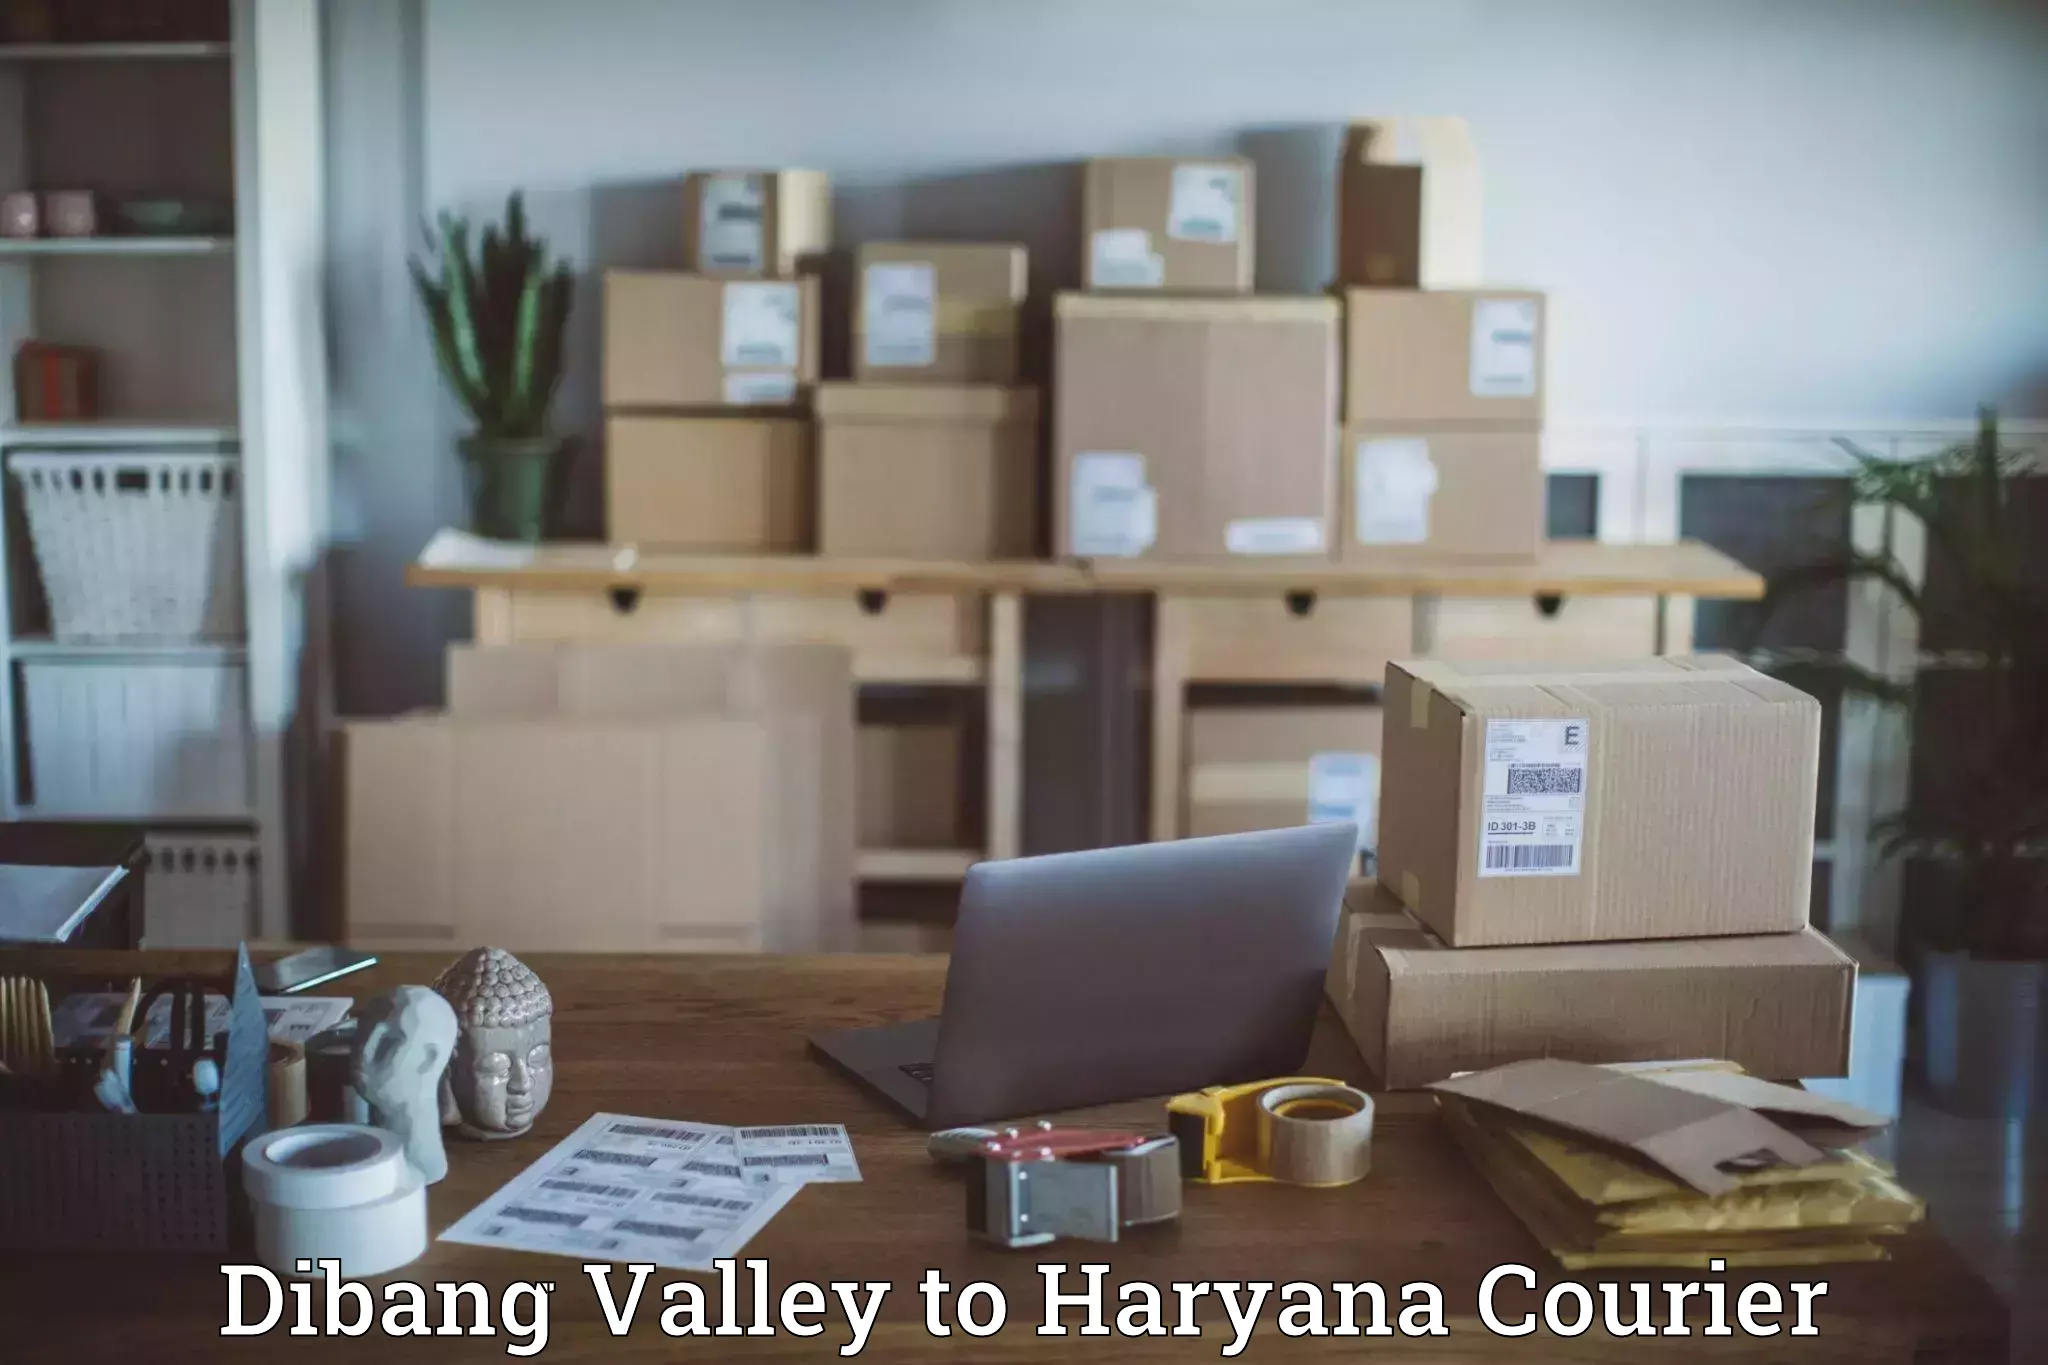 Comprehensive delivery network Dibang Valley to Gurgaon